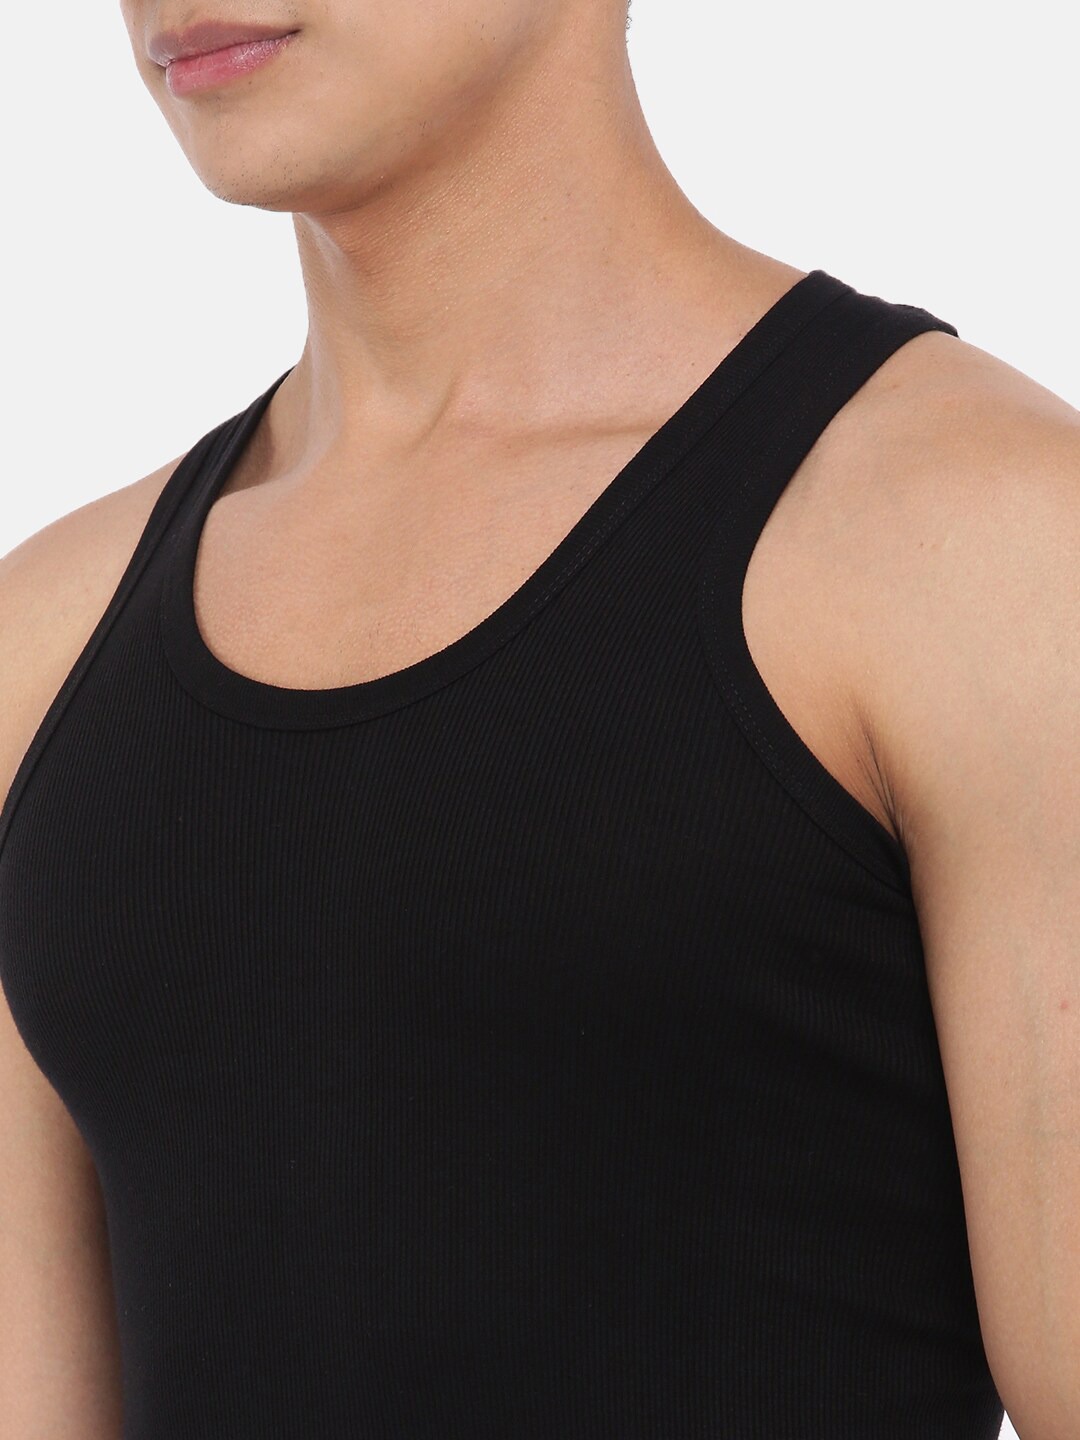 Clothing Innerwear Vests | Dollar Bigboss Men Pack of 10 Solid Basic Pure Cotton Innerwear Vests MBVE-06-R2-DERBY-GM-BLK-PO10 - AX41483